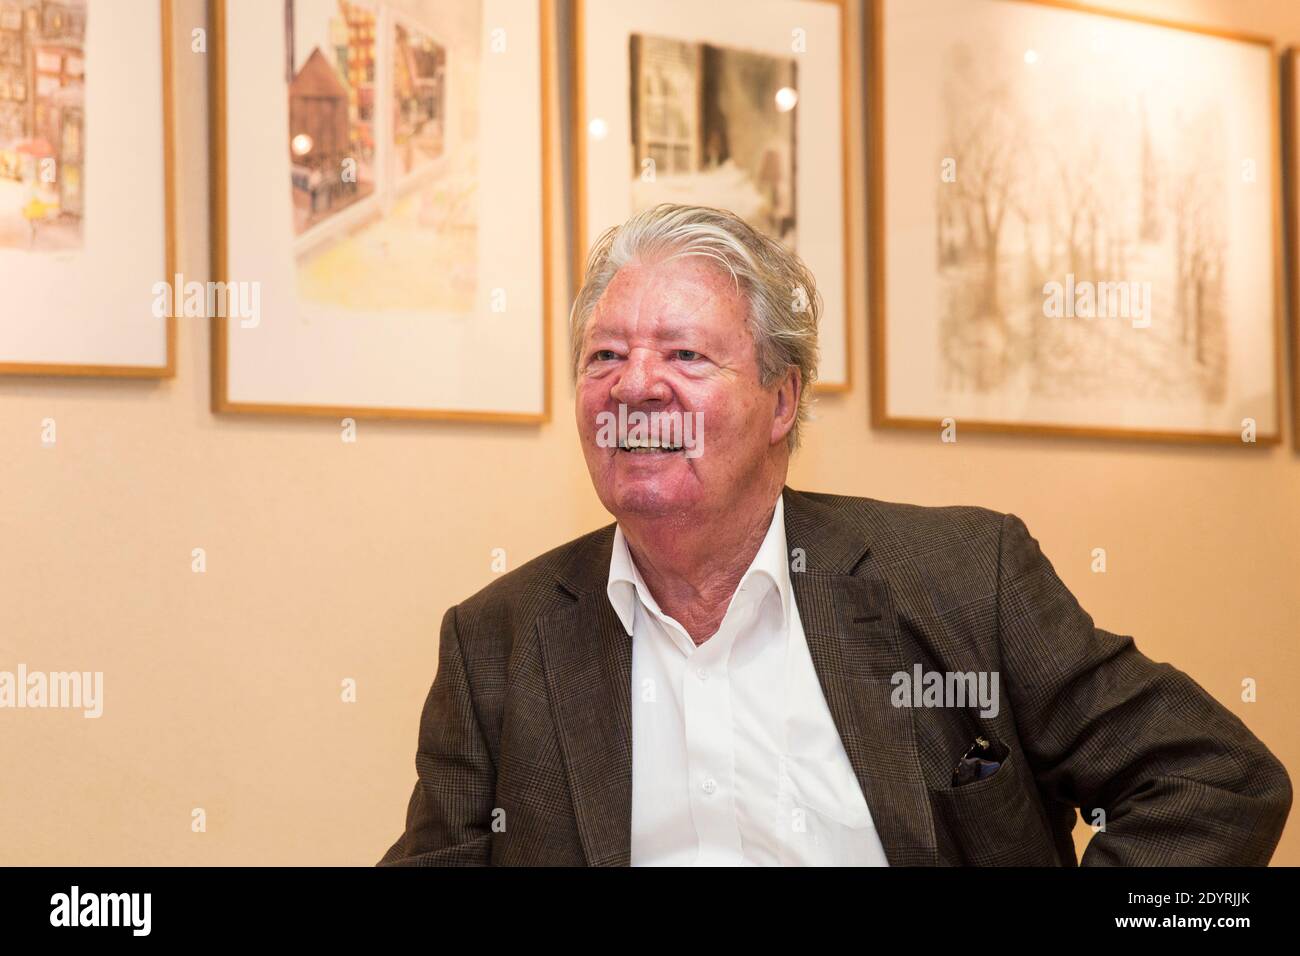 EXCLUSIVE. French cartoonist Jean-Jacques Sempe poses during the opening of his drawing exhibition in Ramatuelle, south of France on July 31, 2013. Photo by Cyril Bruneau/ABACAPRESS.COM Stock Photo